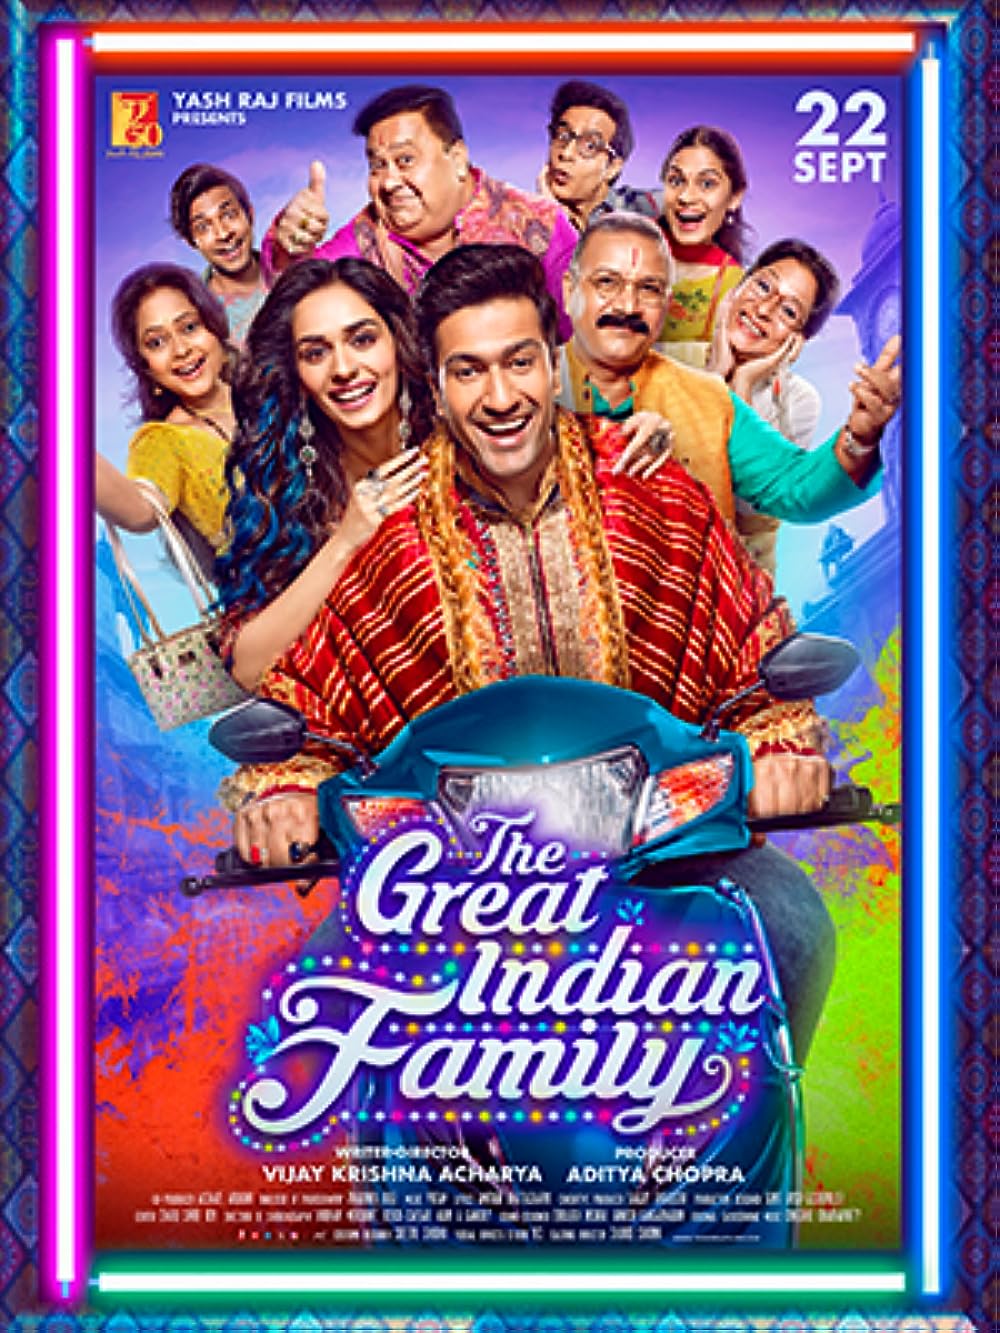 The Great Indian Family (September 22): The Great Indian Family is a funny romantic comedy that takes you on a wild voyage through an Indian family's daily chaos and laughter.